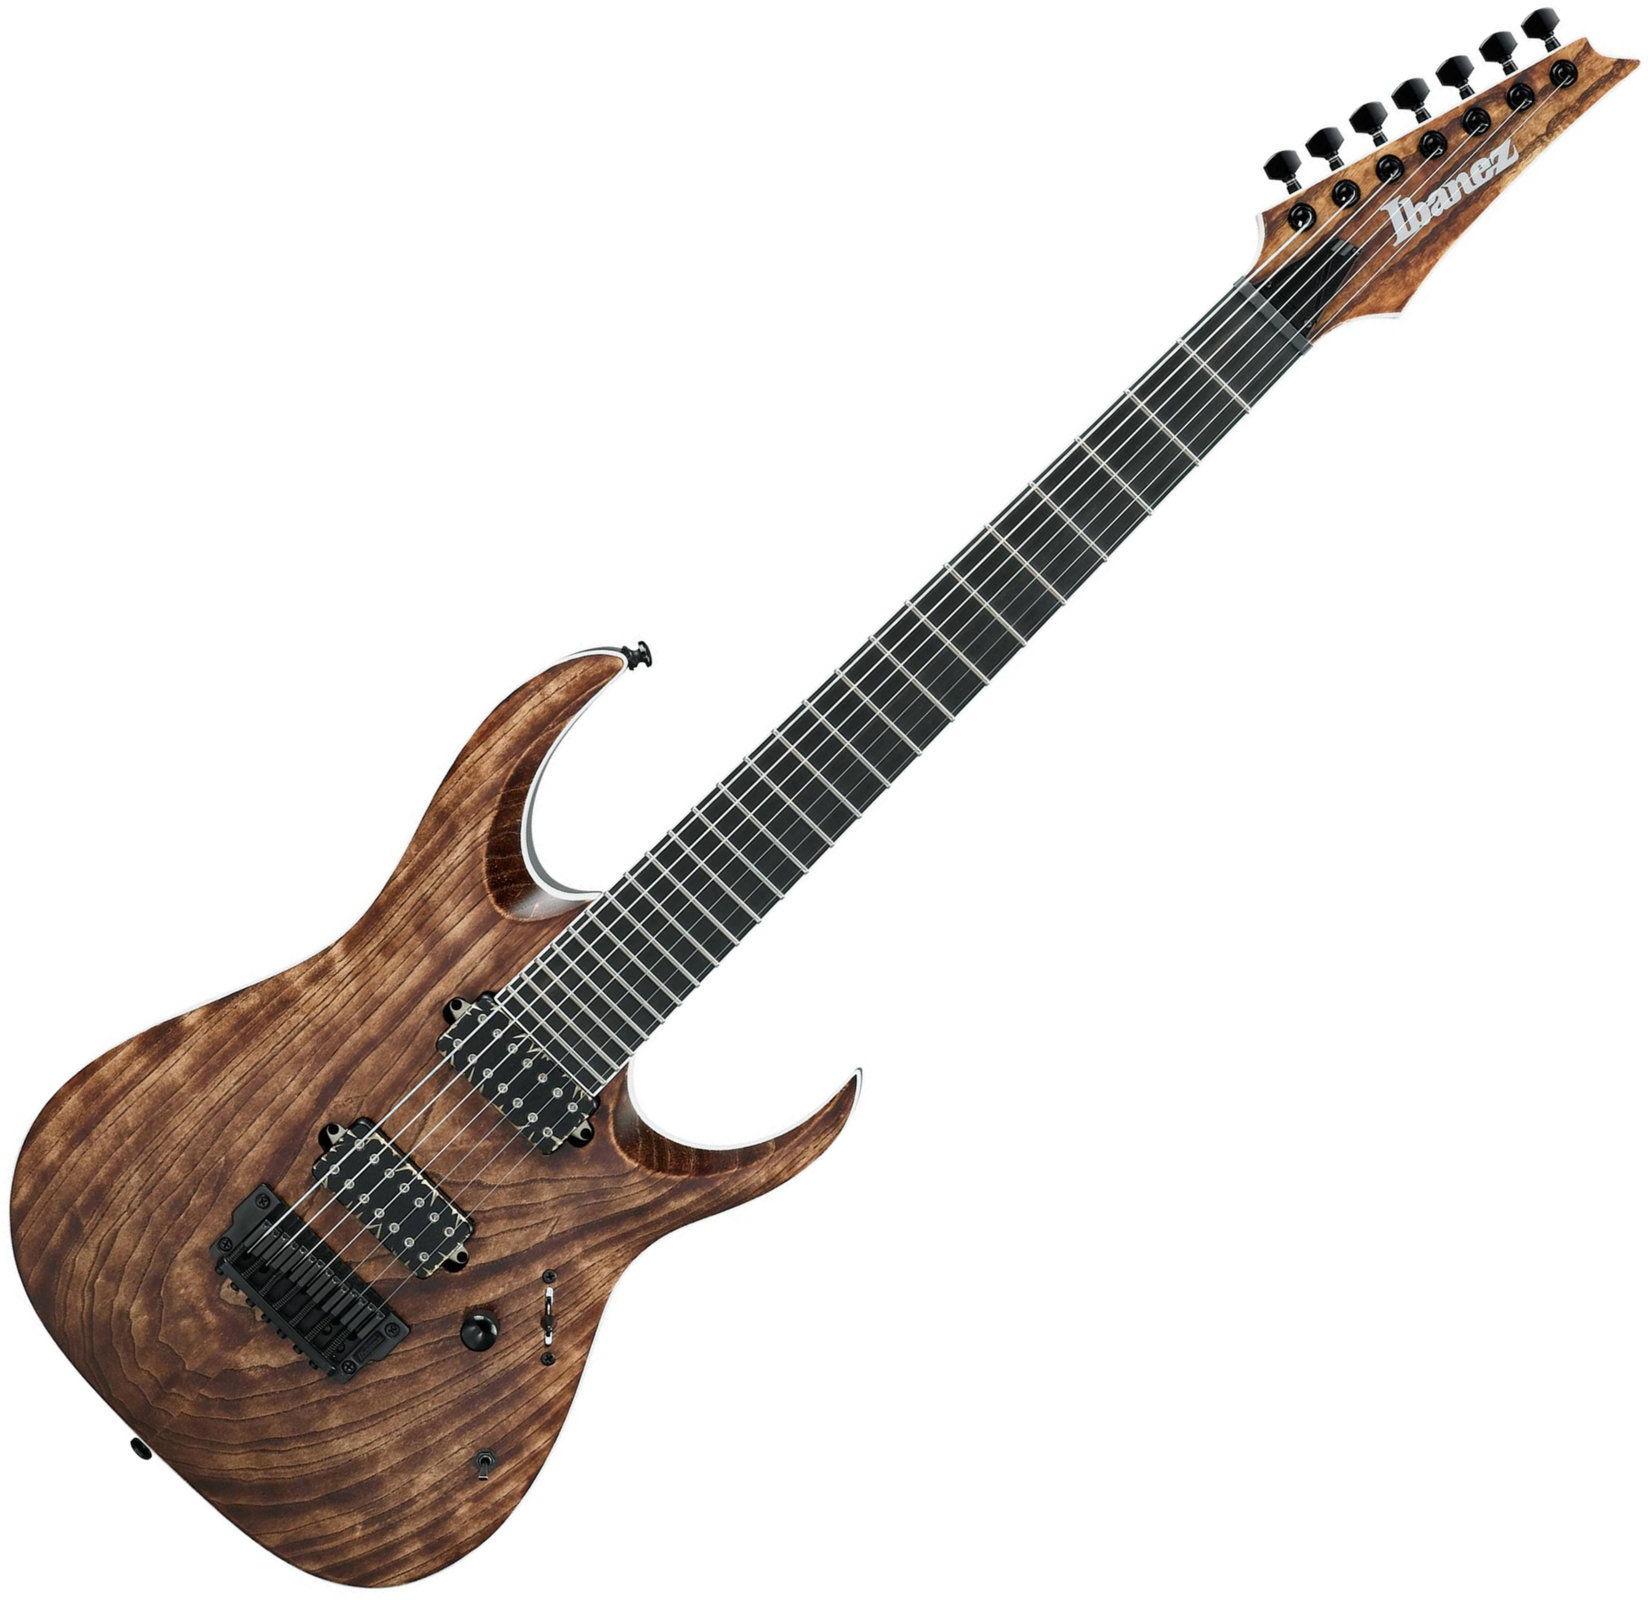 7-string Electric Guitar Ibanez RGAIX7U-ABS Antique Brown Stained